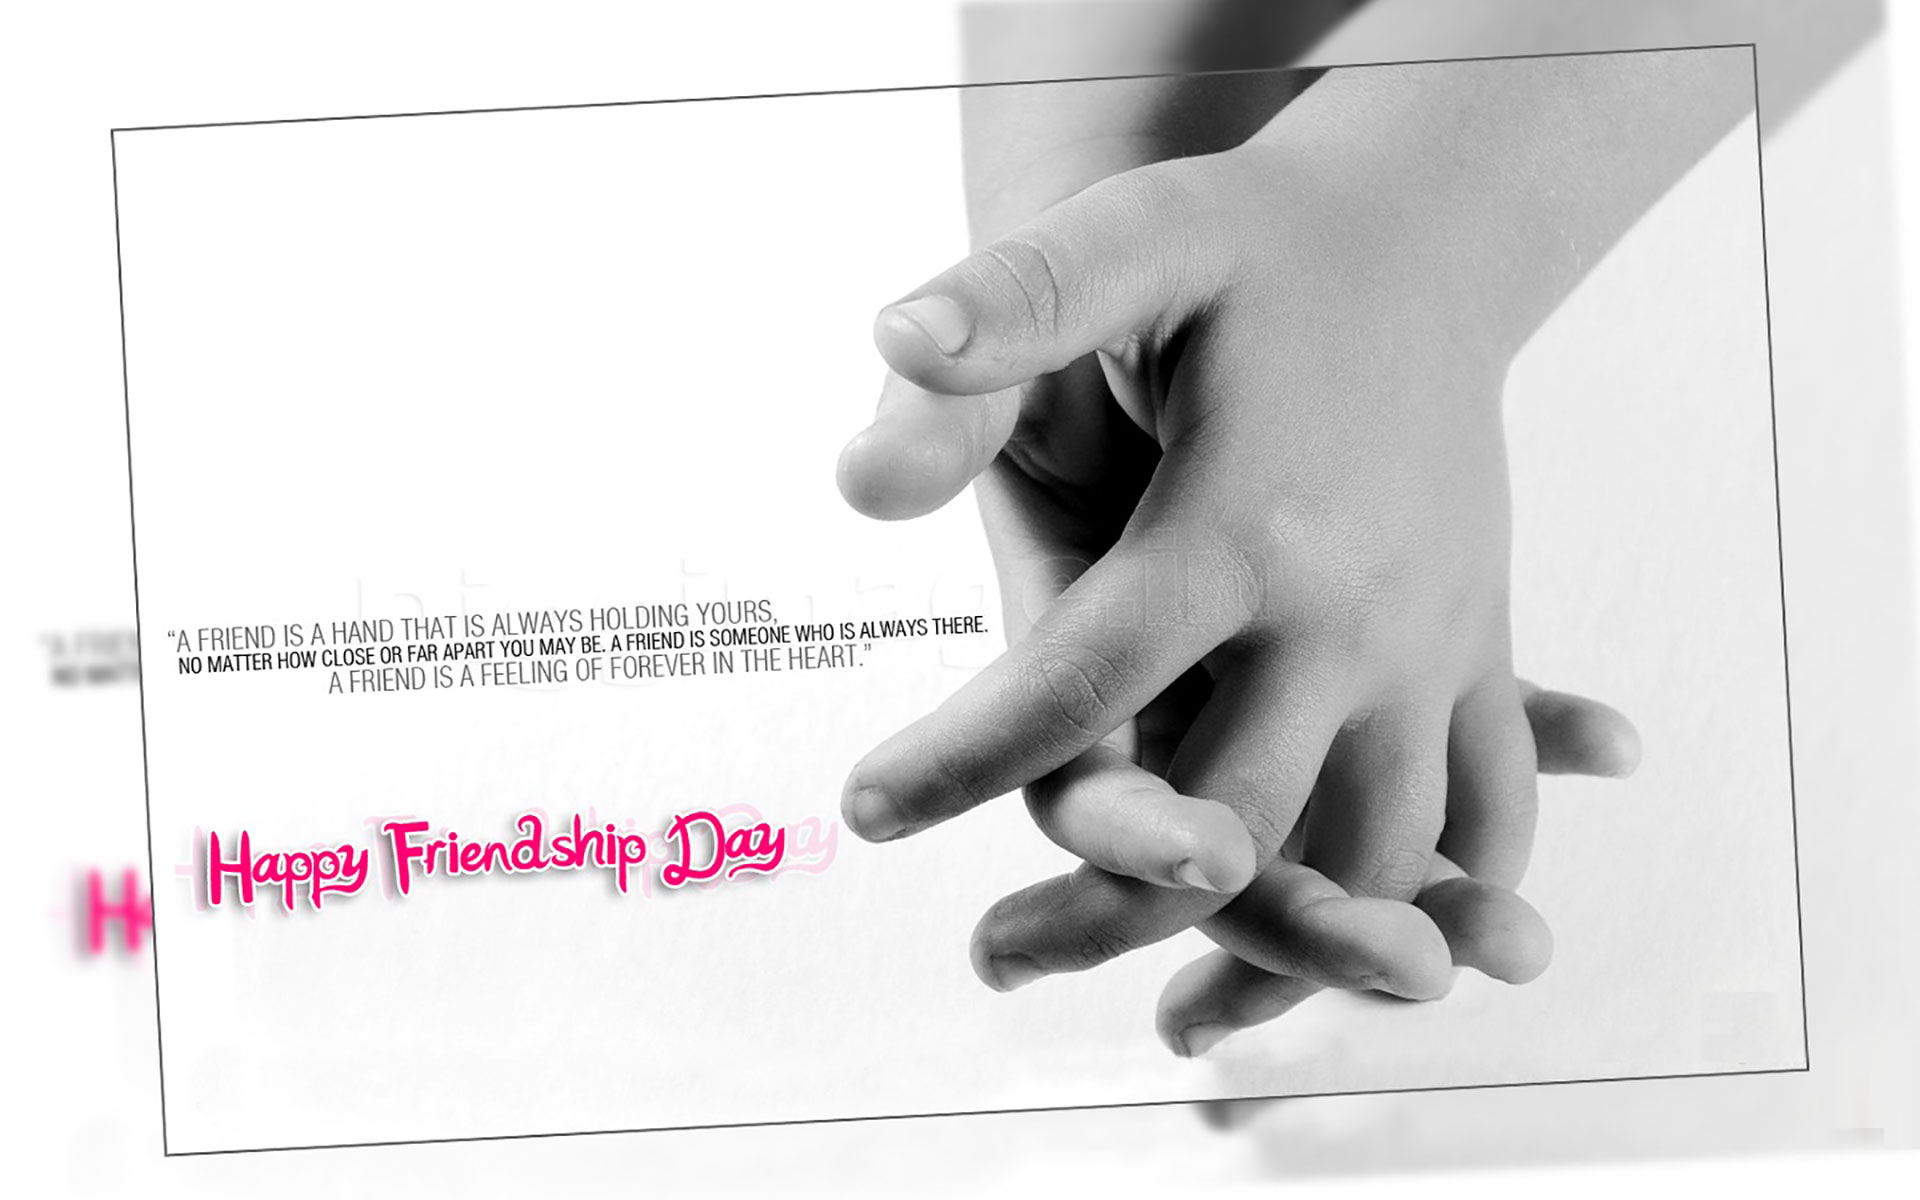 A Friend Is A Hand That Is Always Hold Yours My Best - Happy Friendship Day Romantic , HD Wallpaper & Backgrounds